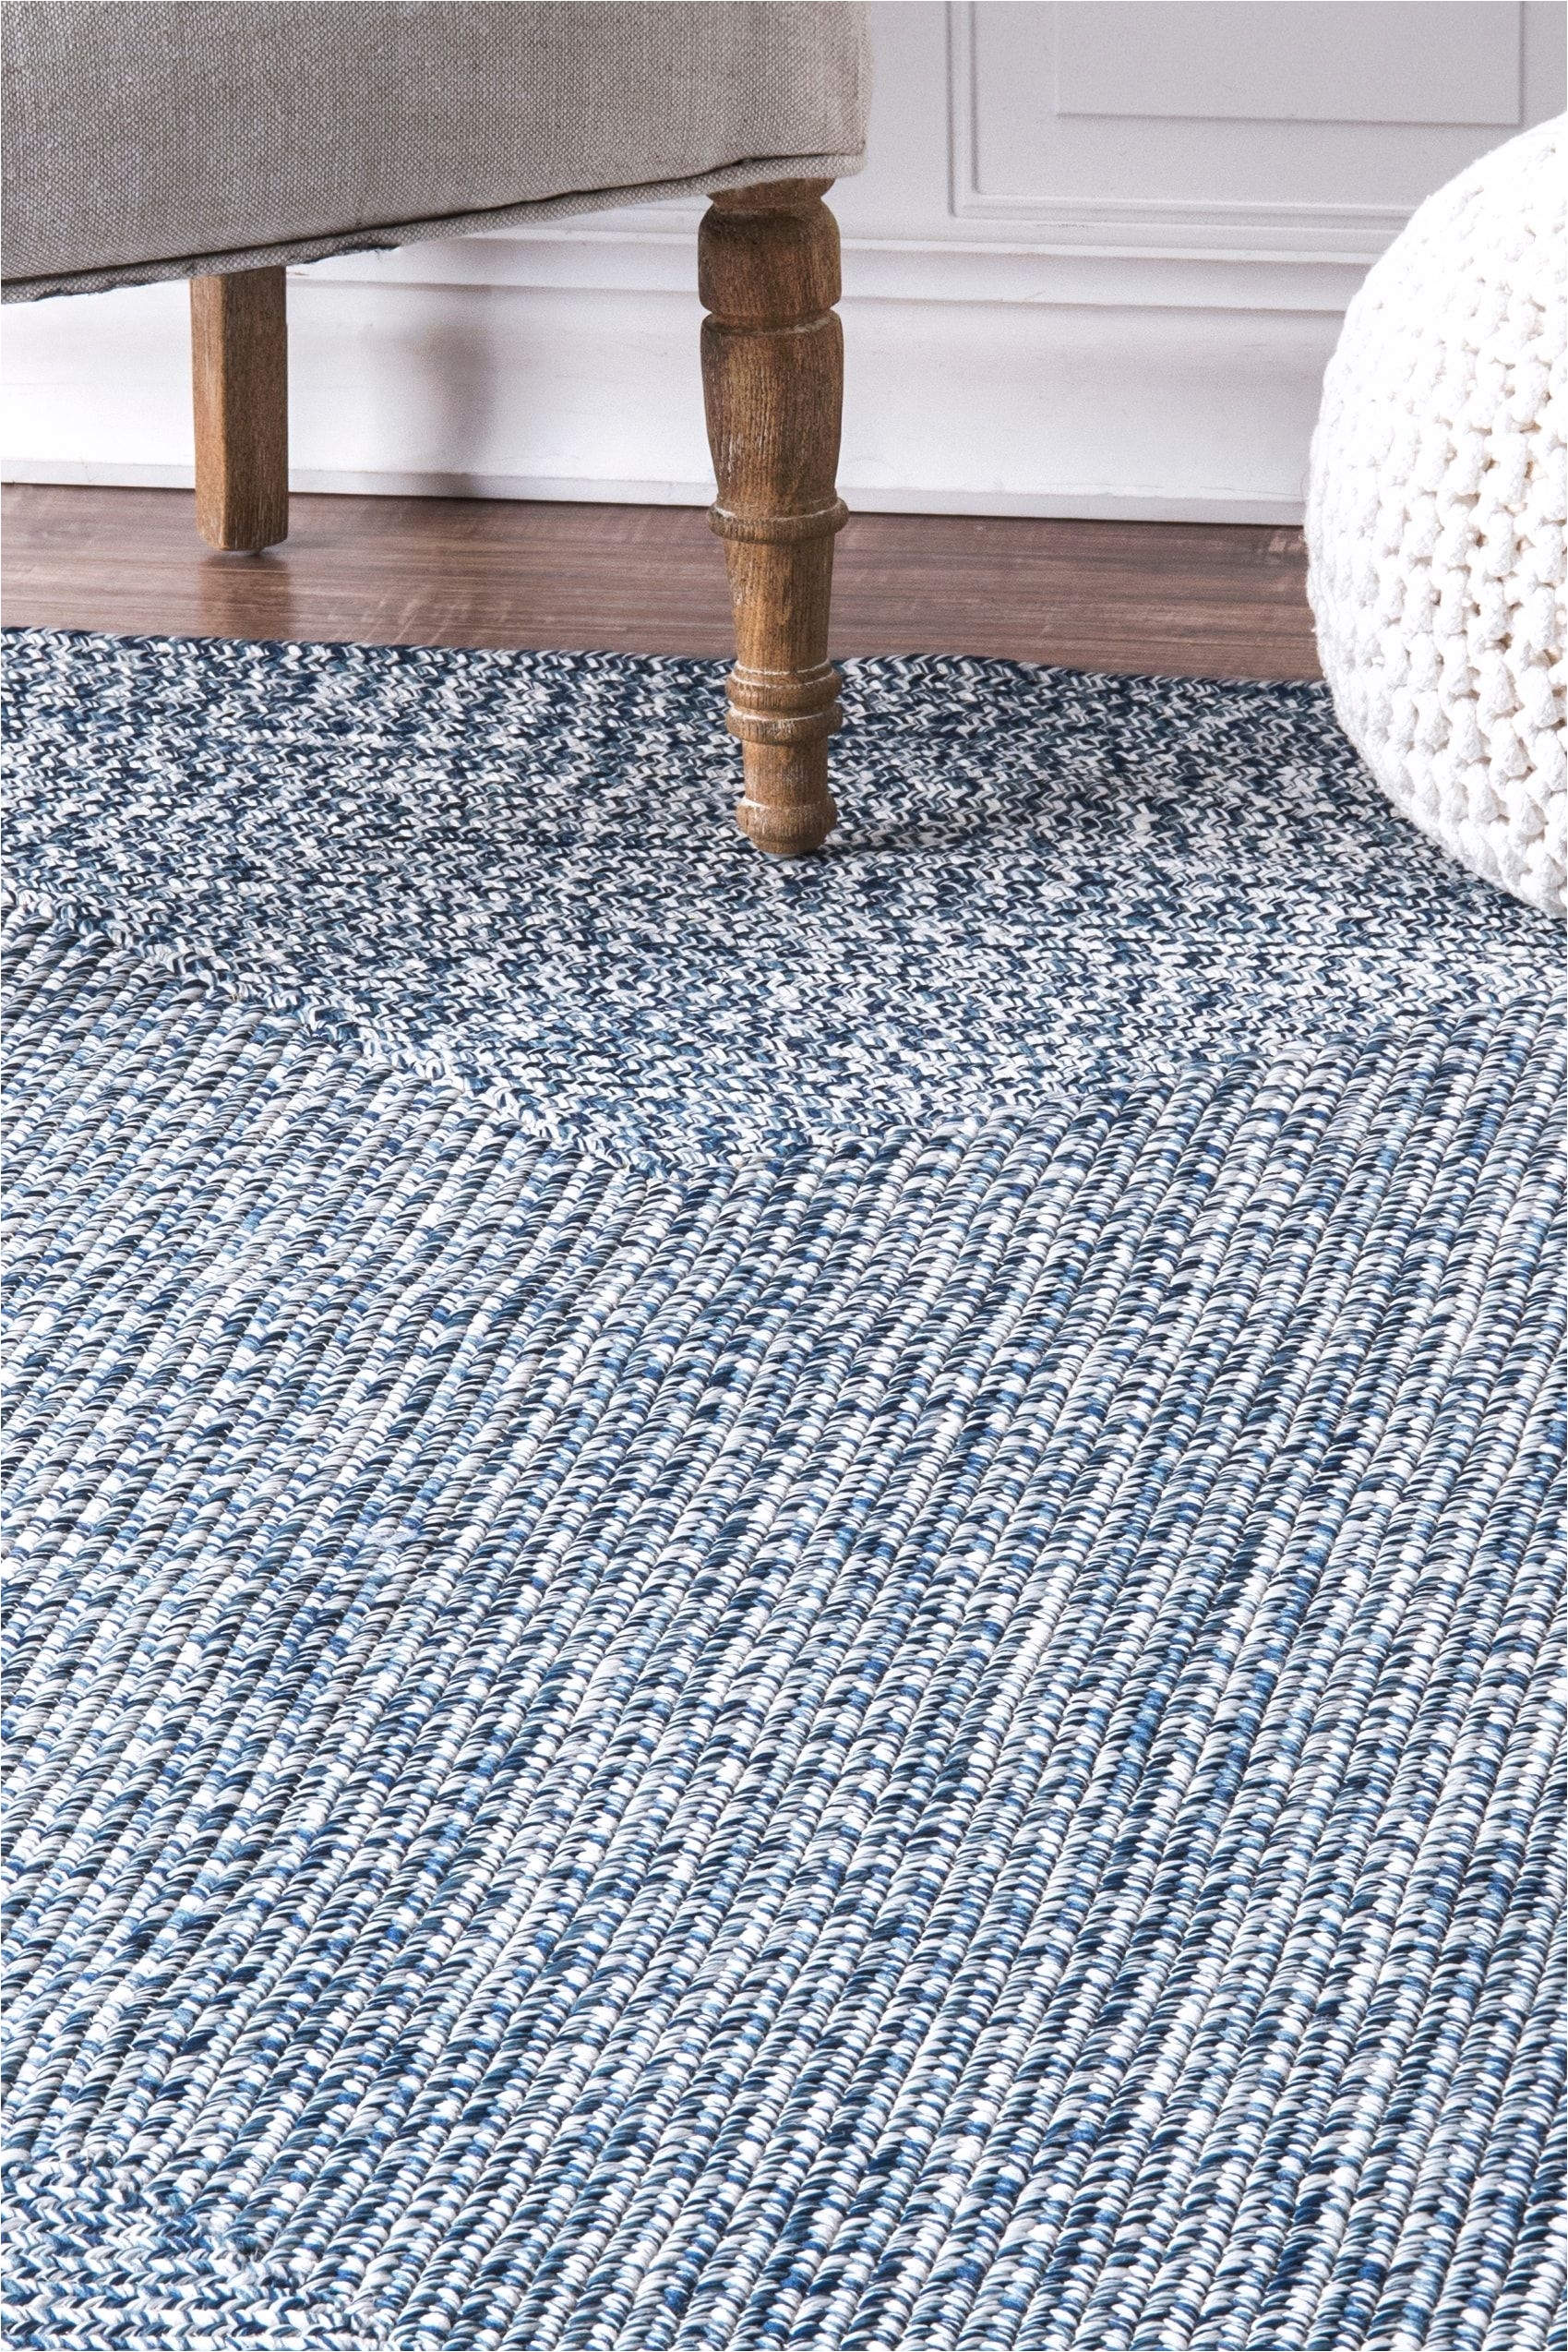 bring this contemporary and braided rug to give an elegant and chic look to your home made of 100 percent polypropylene fiber the rug is thin and easy to